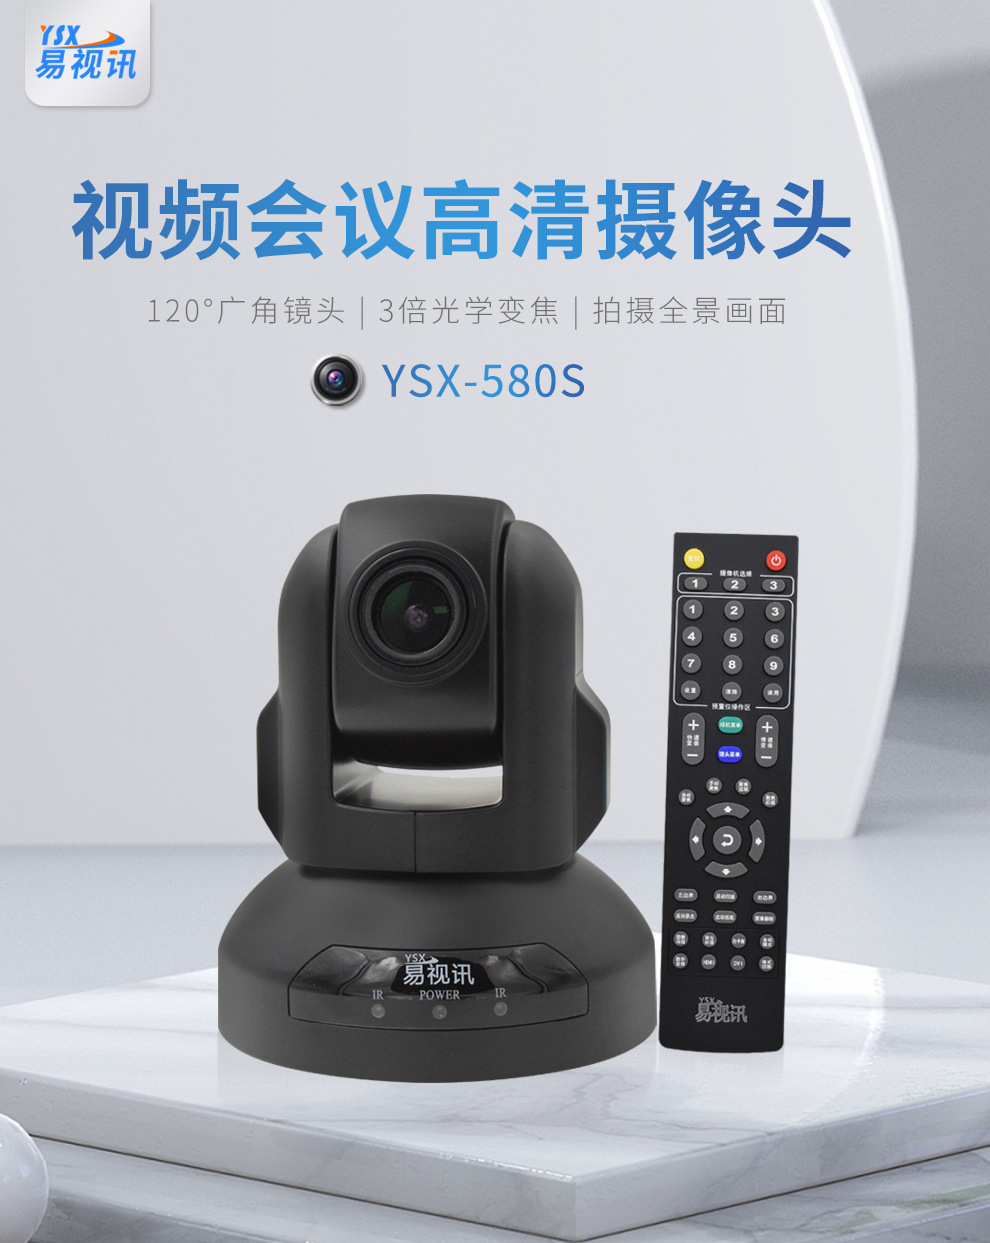 YSX high-definition video conference camera USB drive free YSX-580S remote conference system equipment